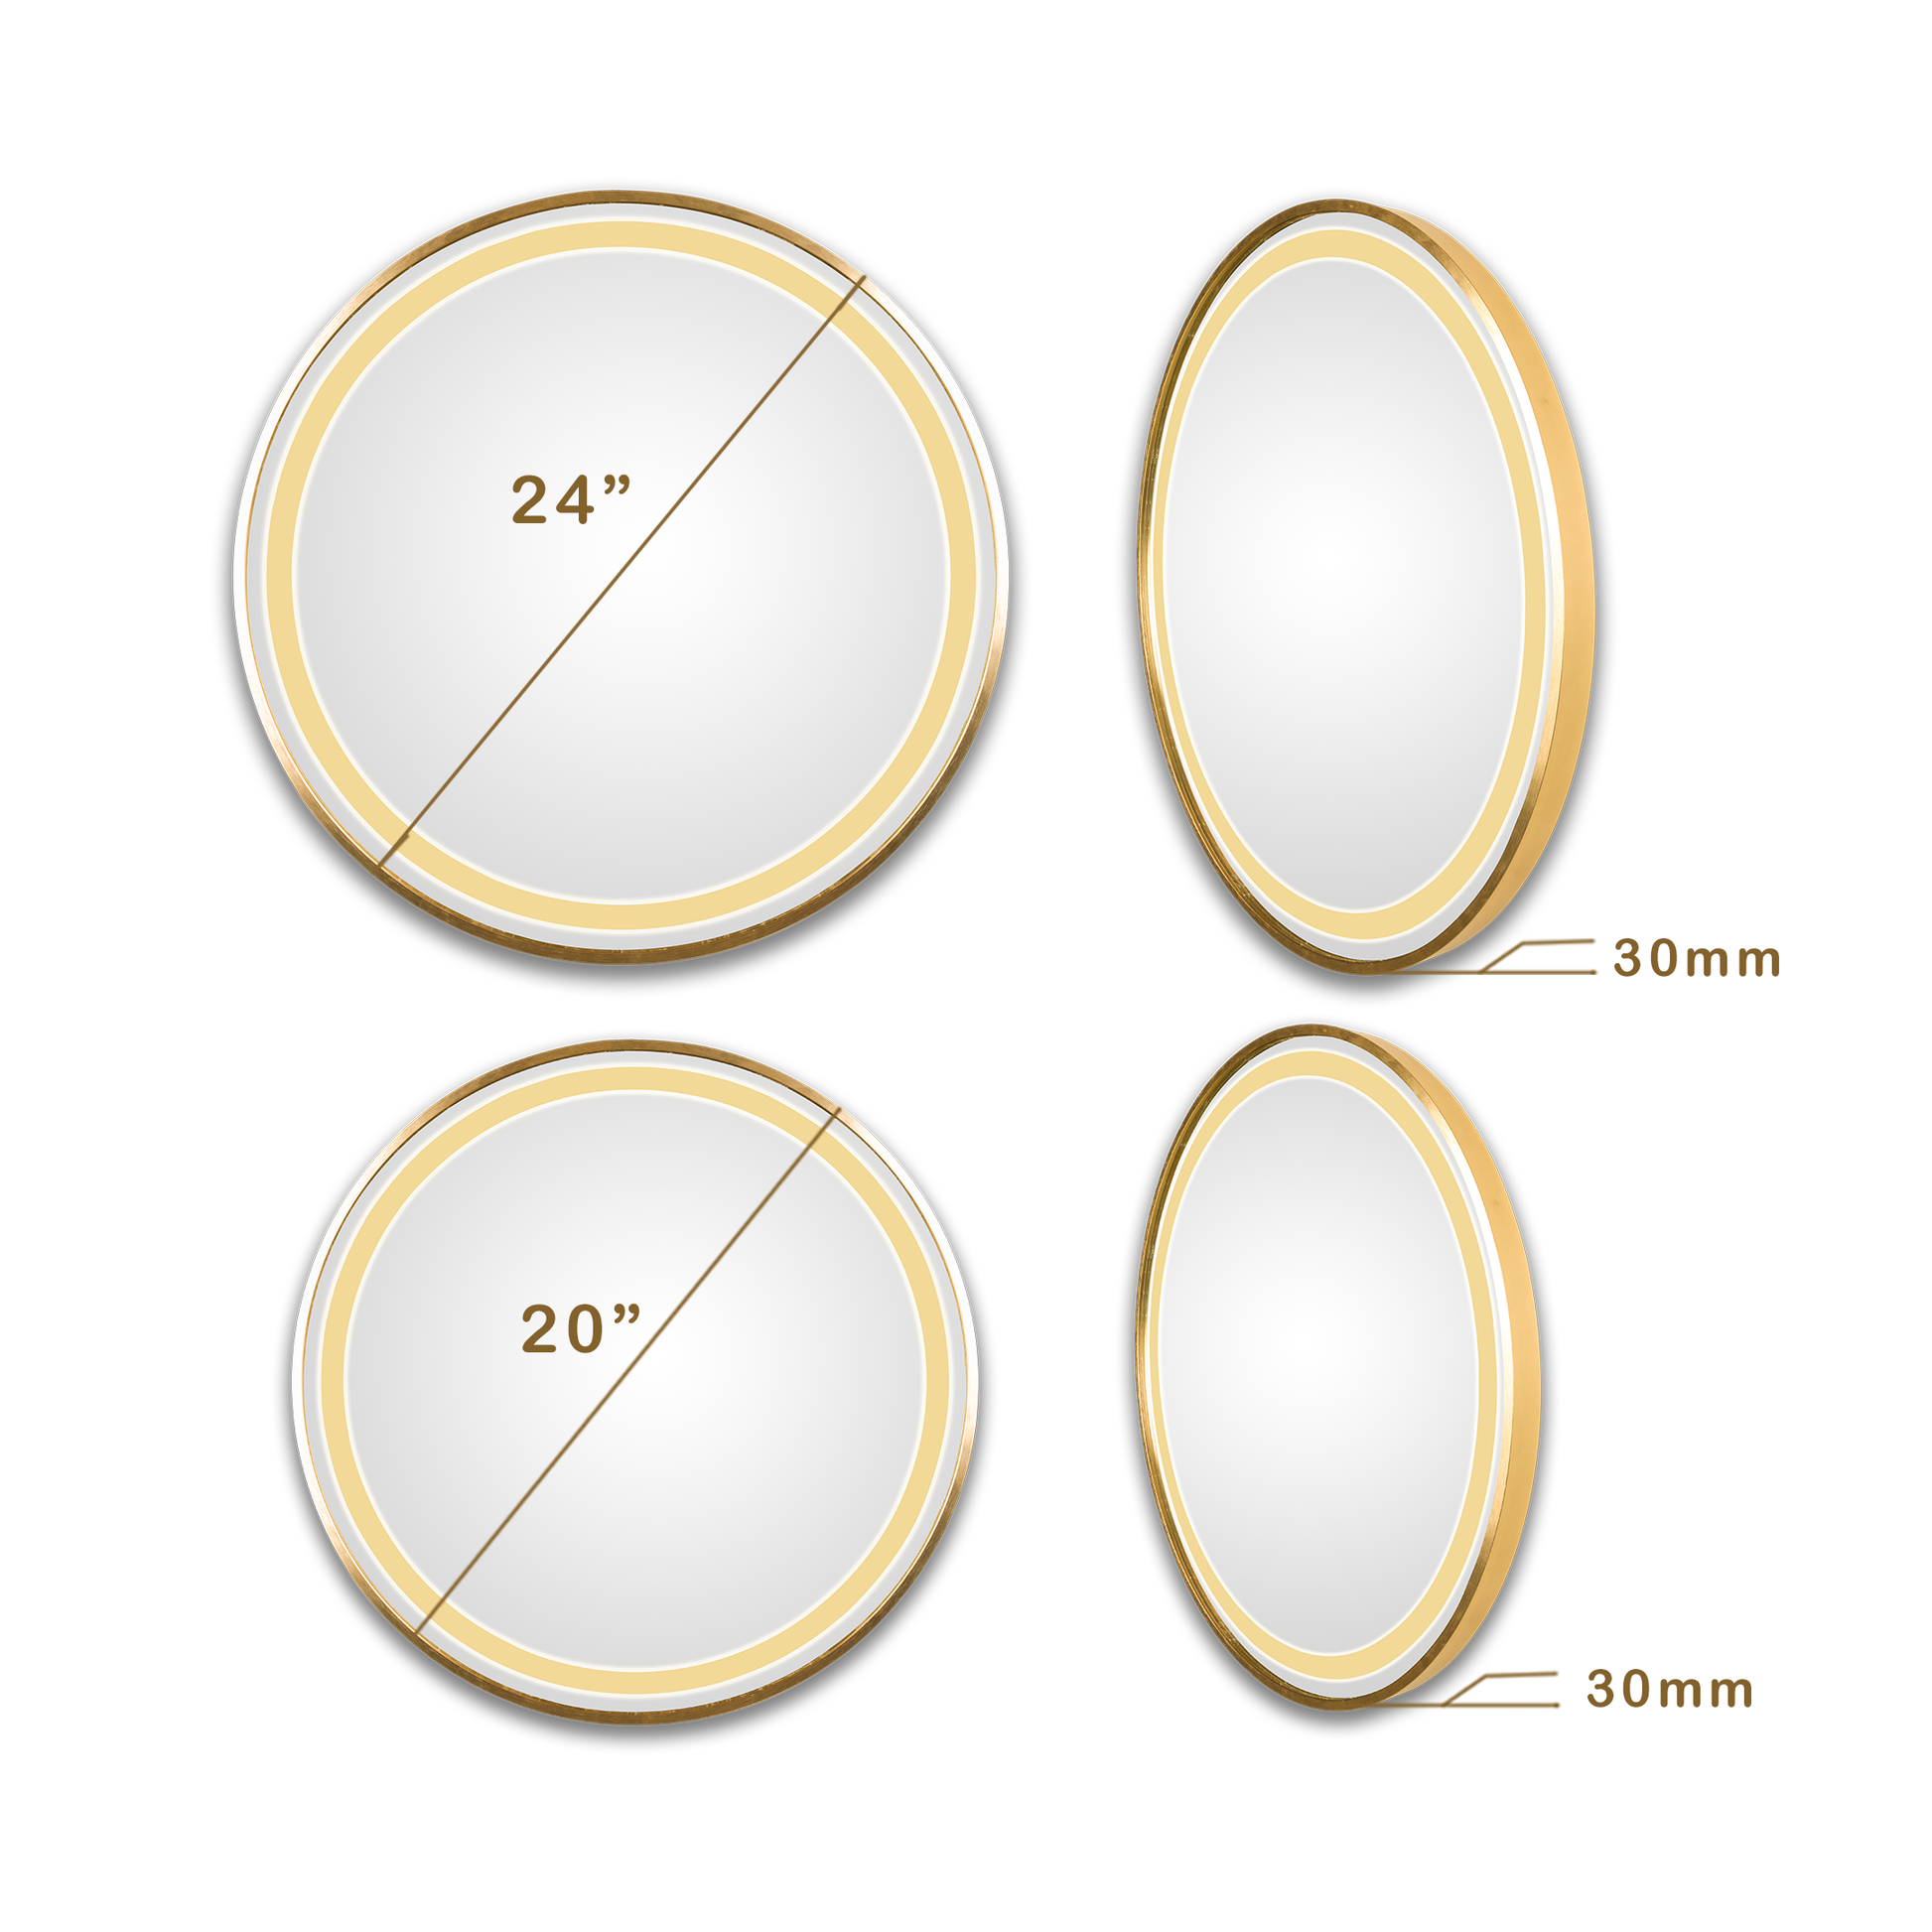 d4c4dc39-1f87-44b1-b120-29fbe5a10dad/Round_30_Gold_dimensions.png